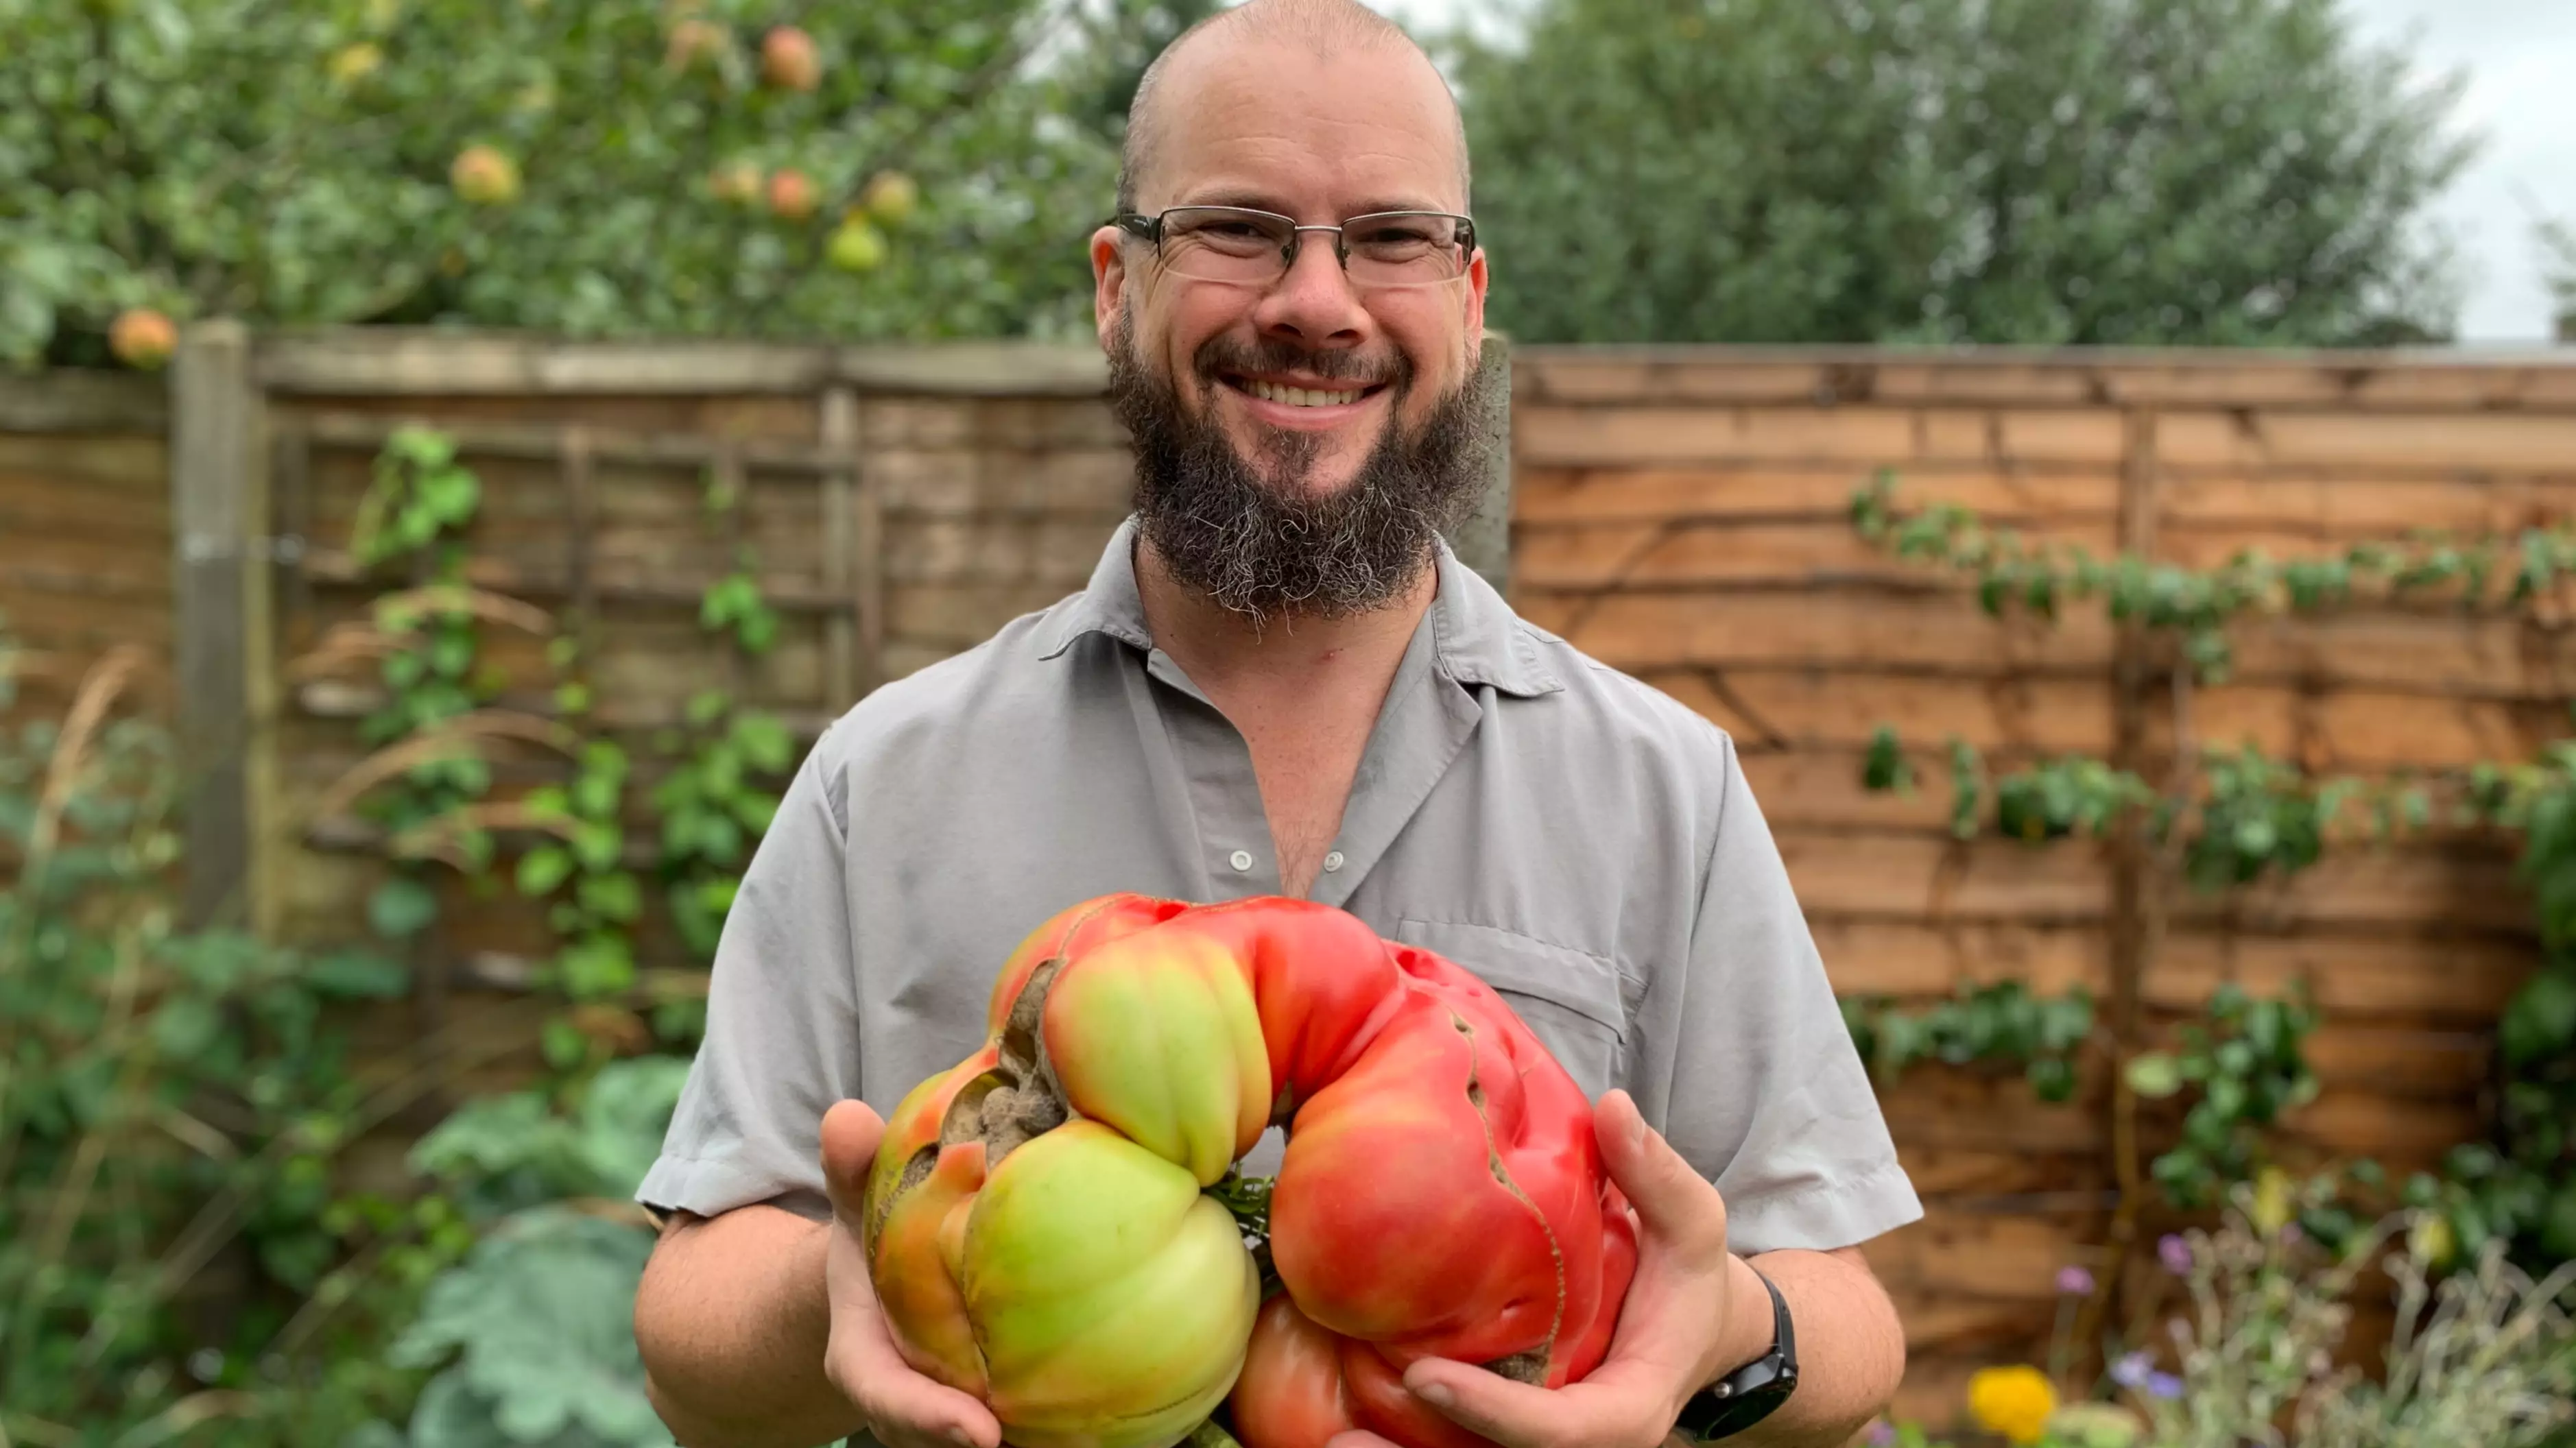 Dad Grows UK's Biggest Tomato Using A Pair Of Tights